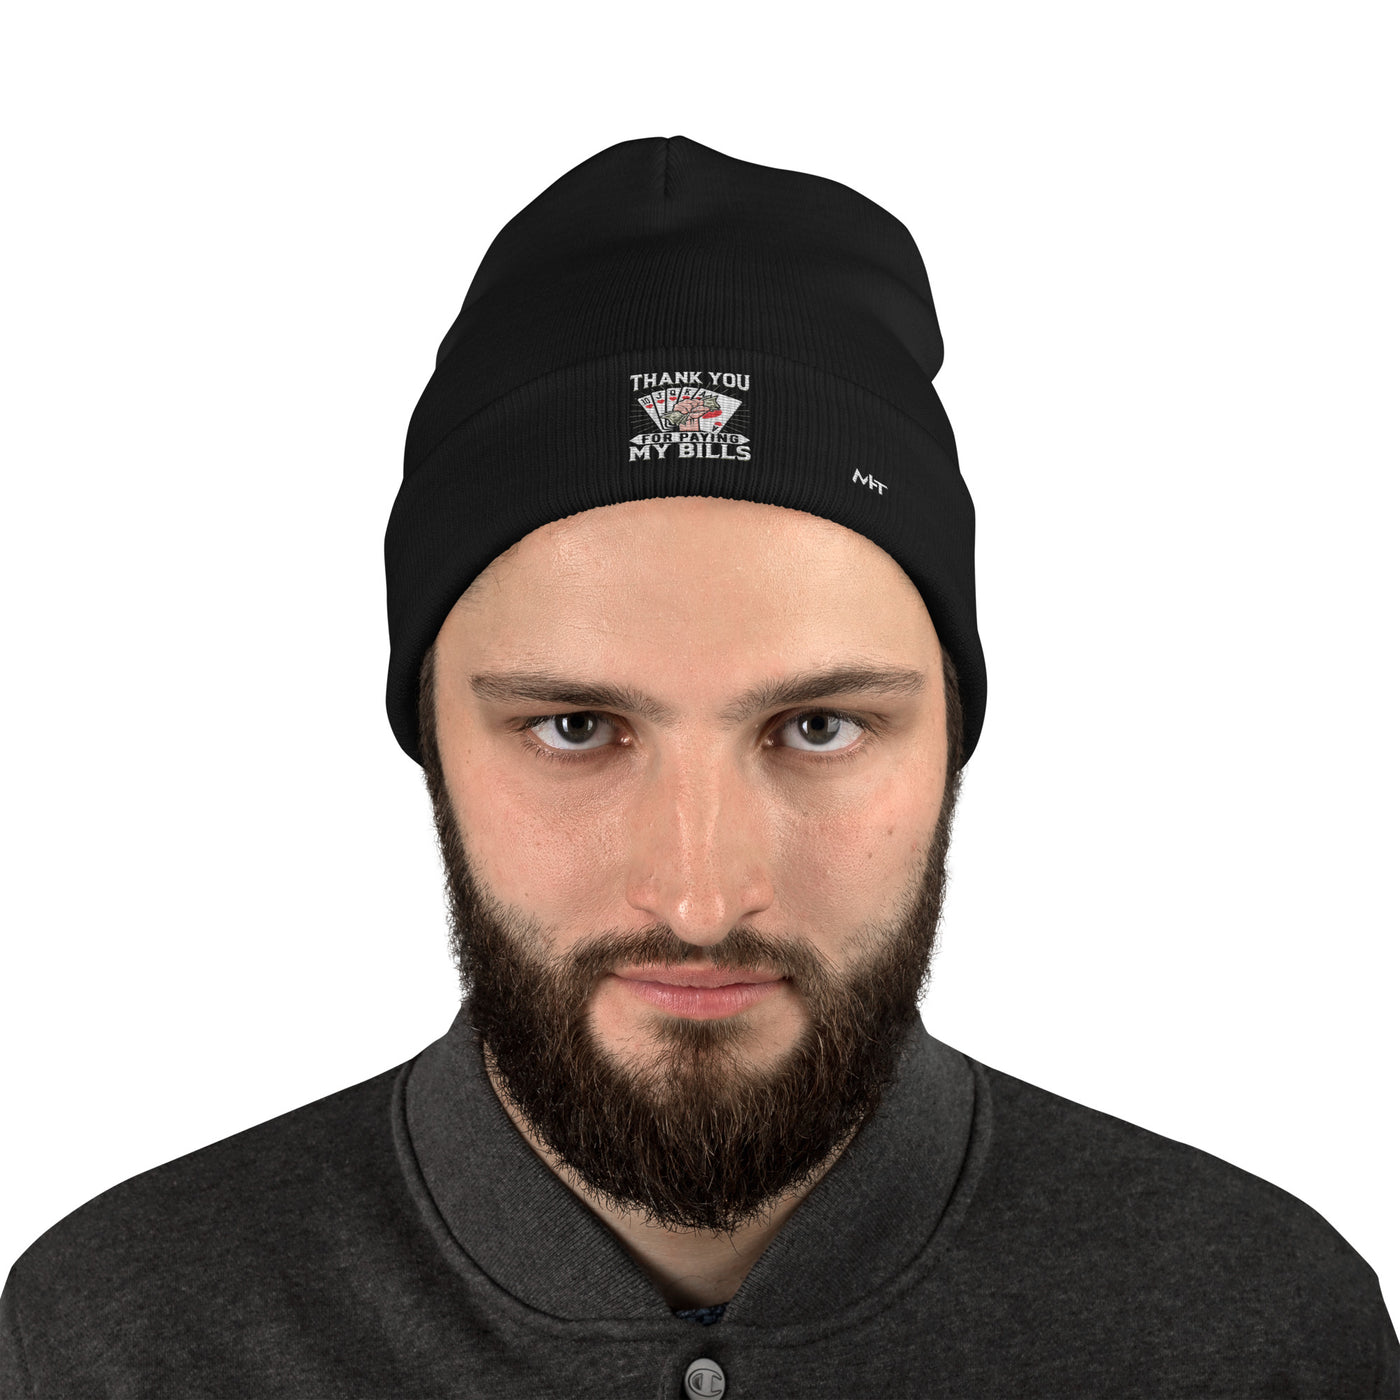 Thank you for Paying my bills - Embroidered Beanie